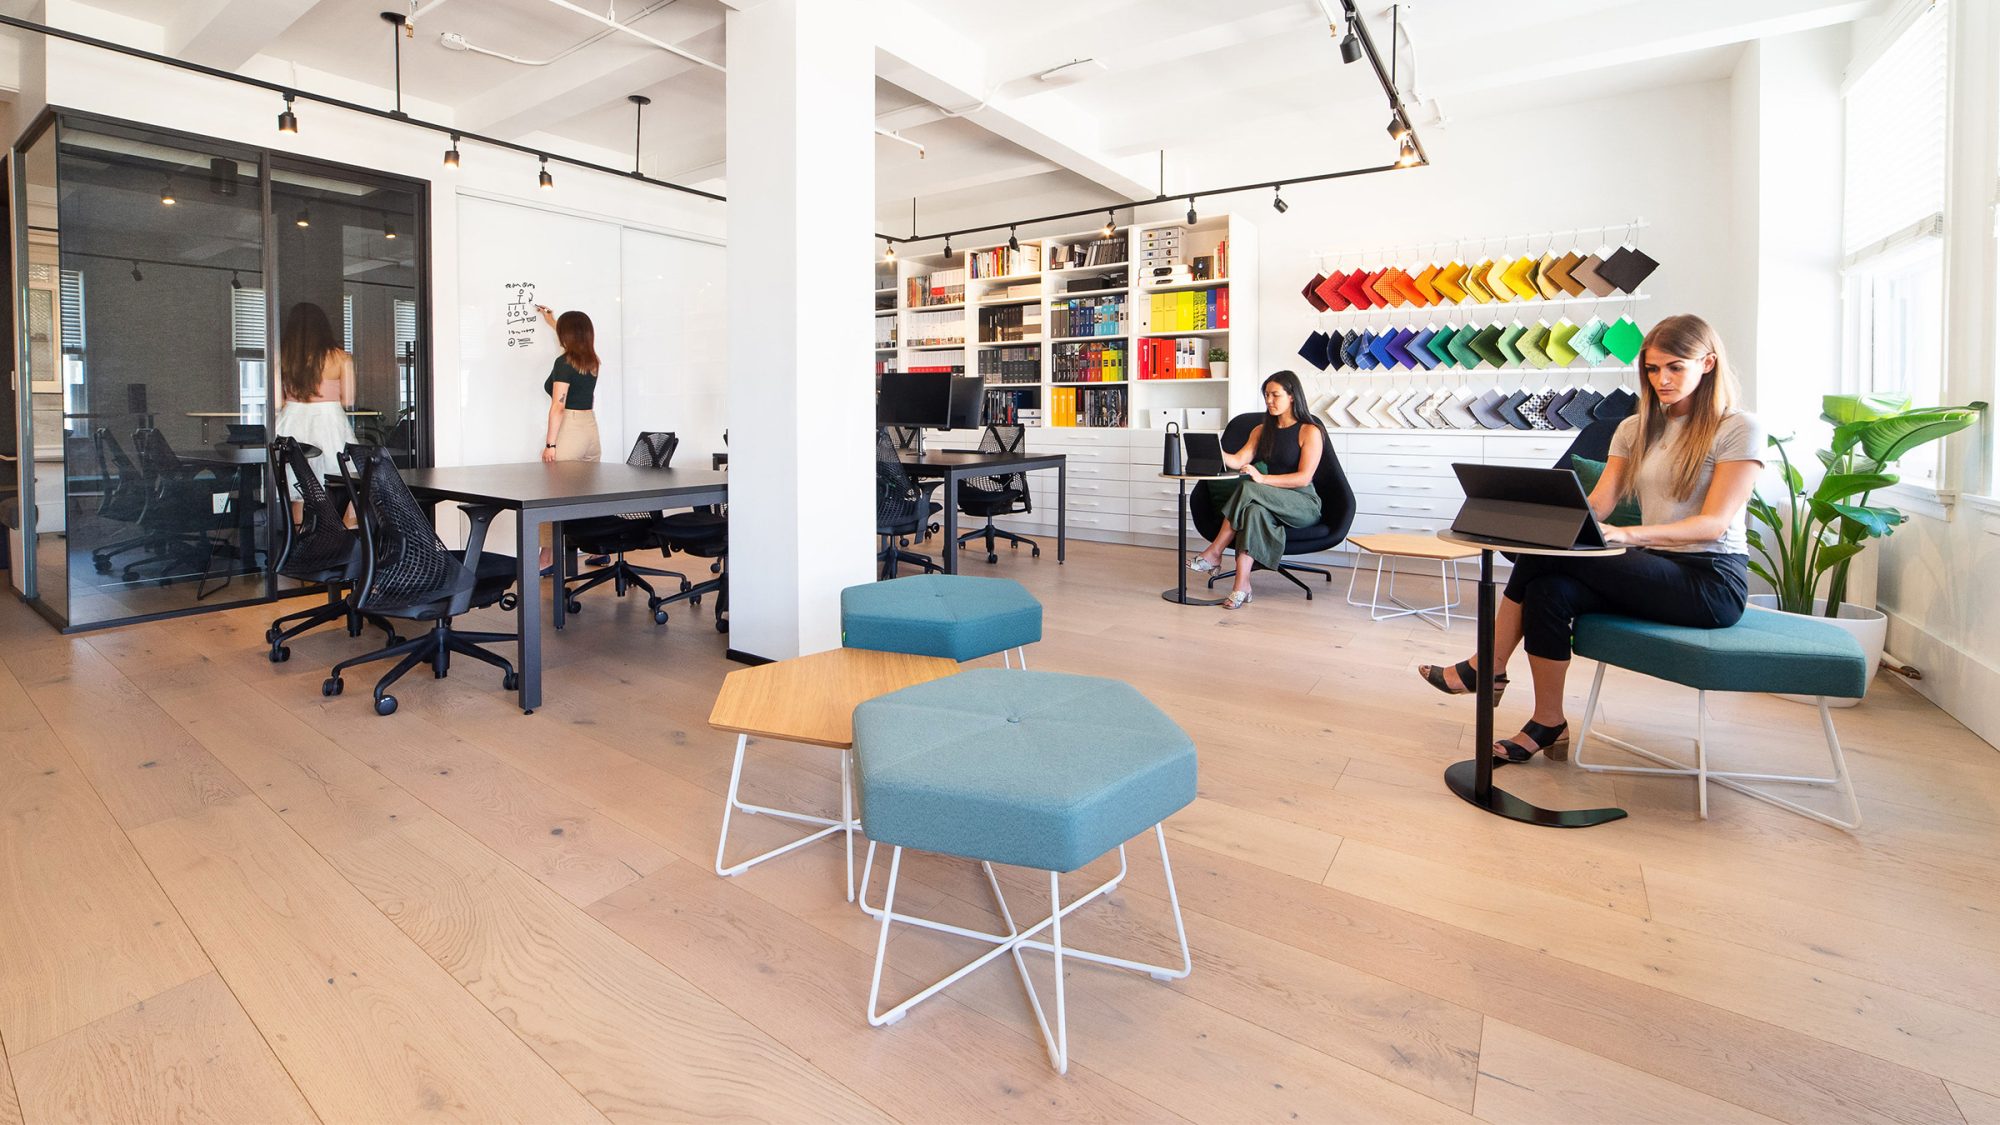 Vancouver workplace design showing open collaborative space